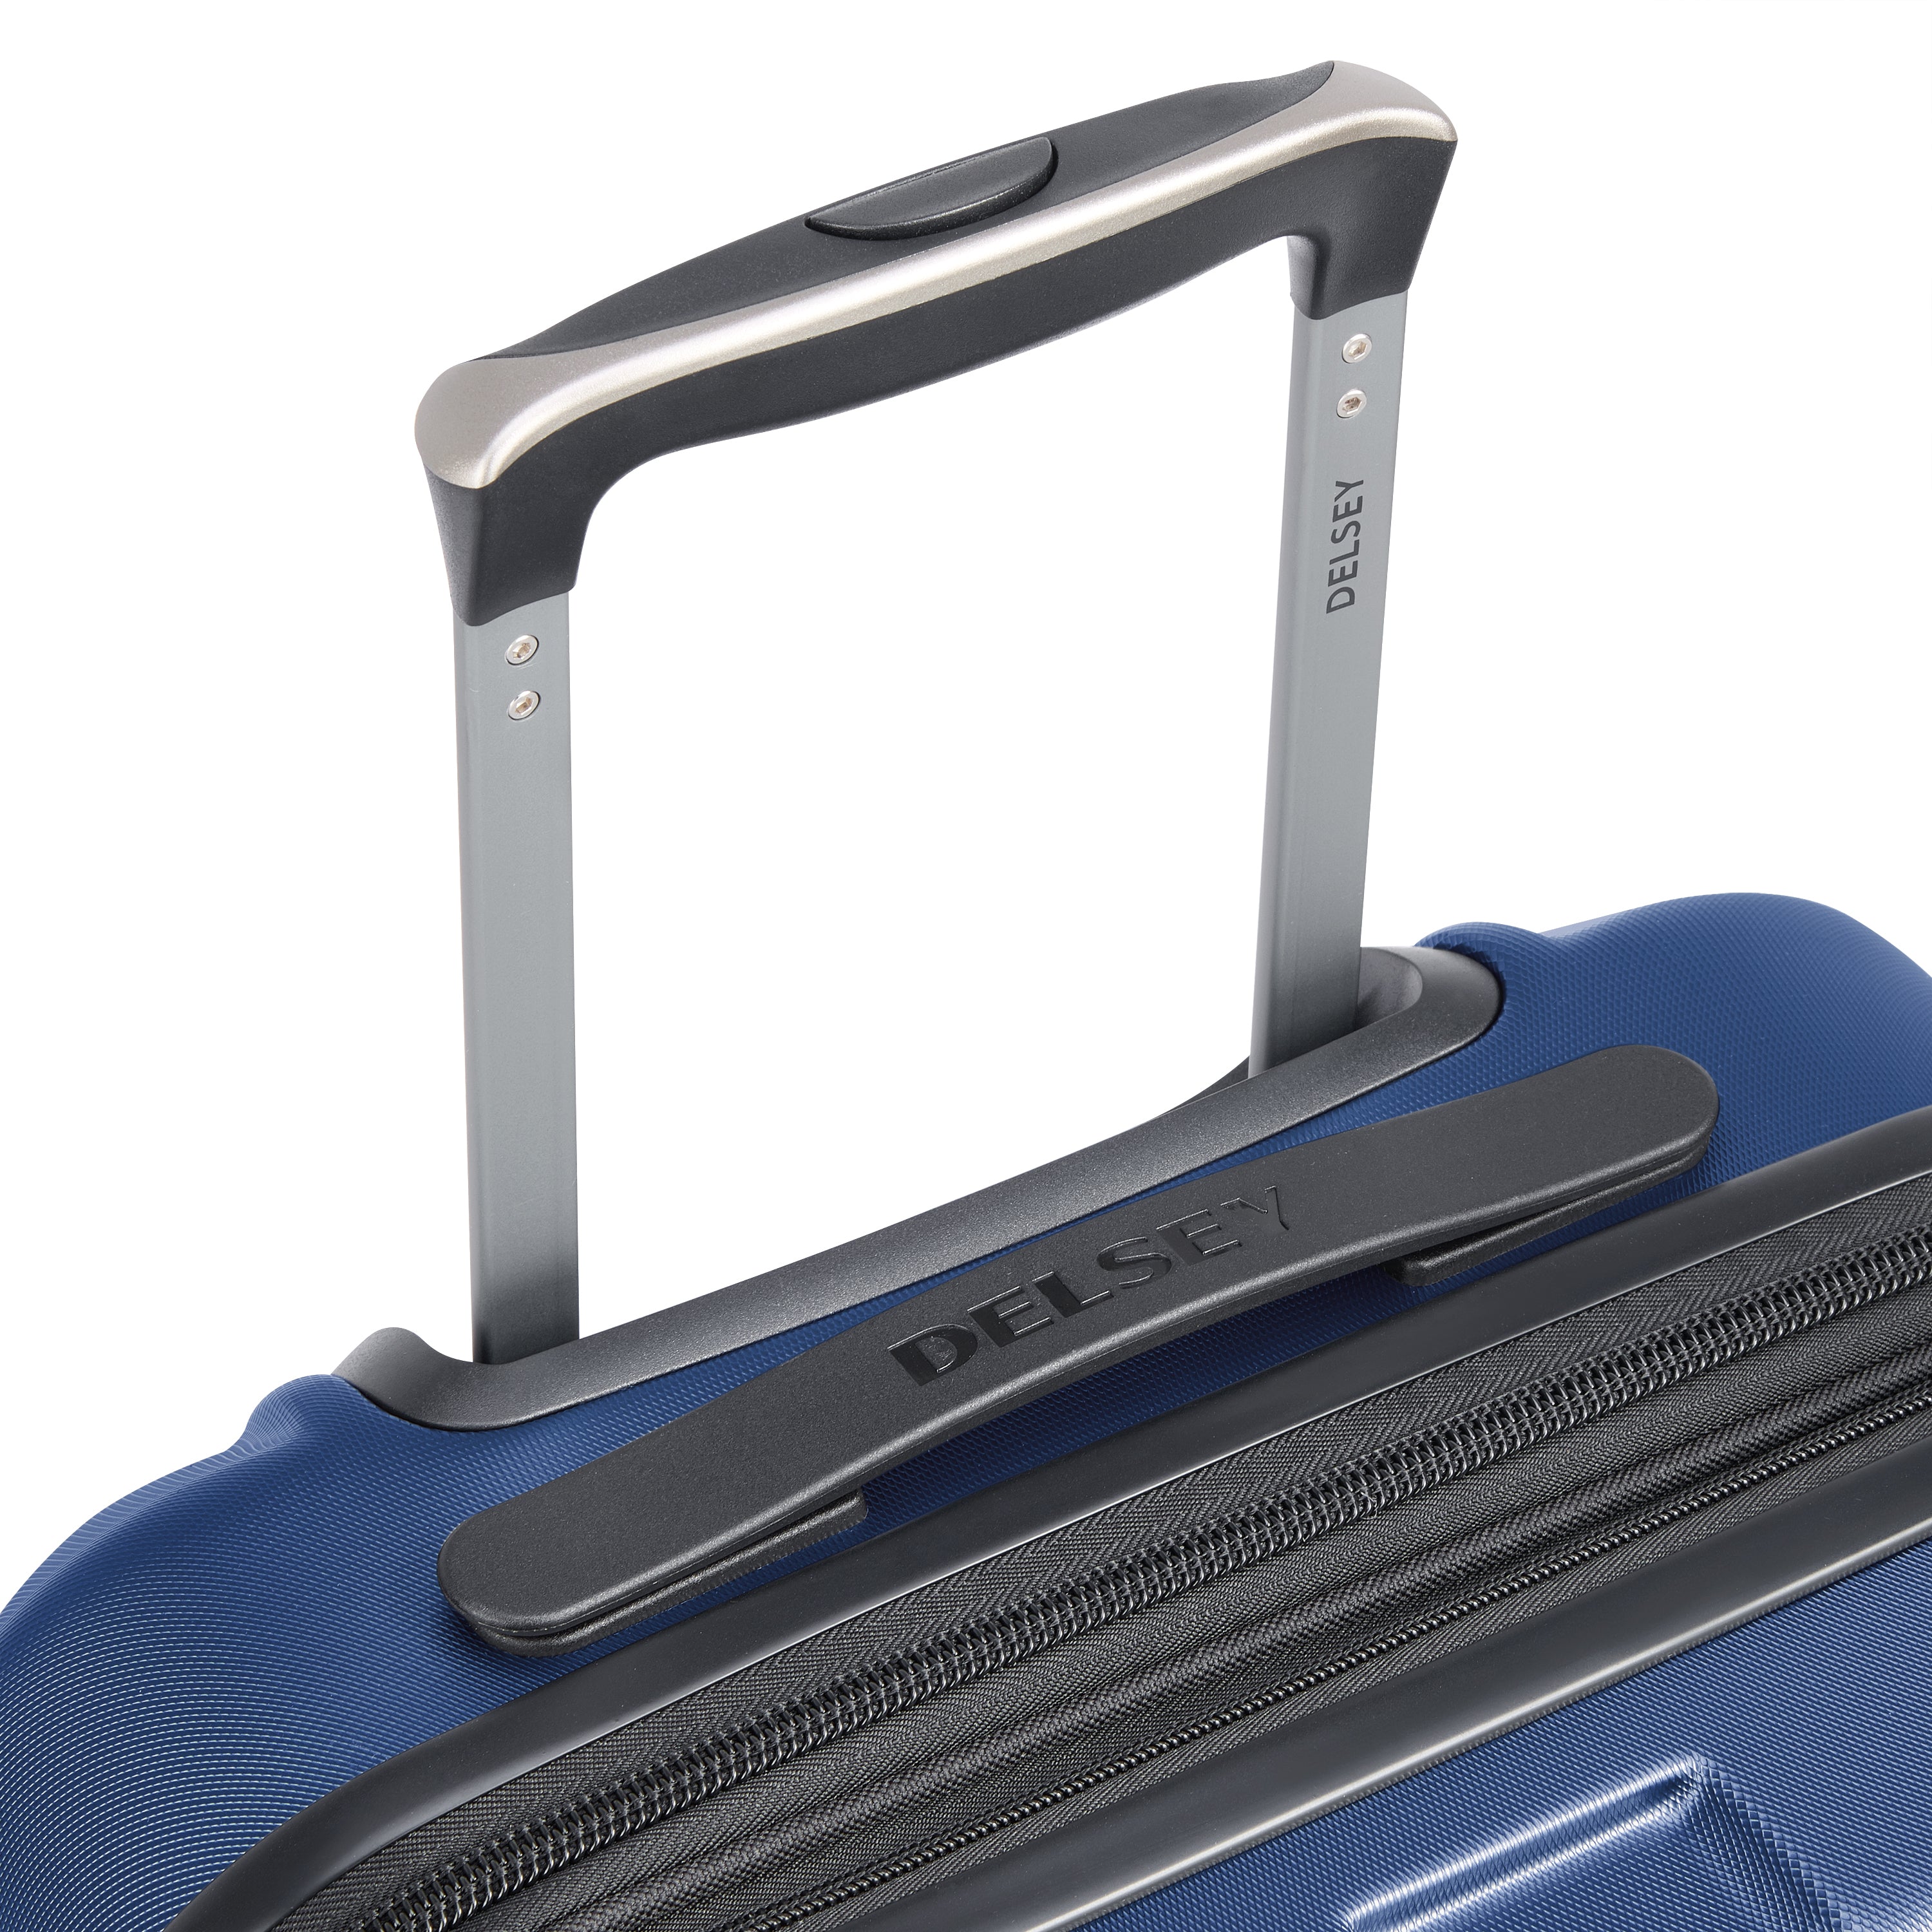 Delsey Depart Hard 61cm Hardcase Expandable 4 Double Wheel Cabin Luggage Trolley Case Navy Blue - 00314580522 X9